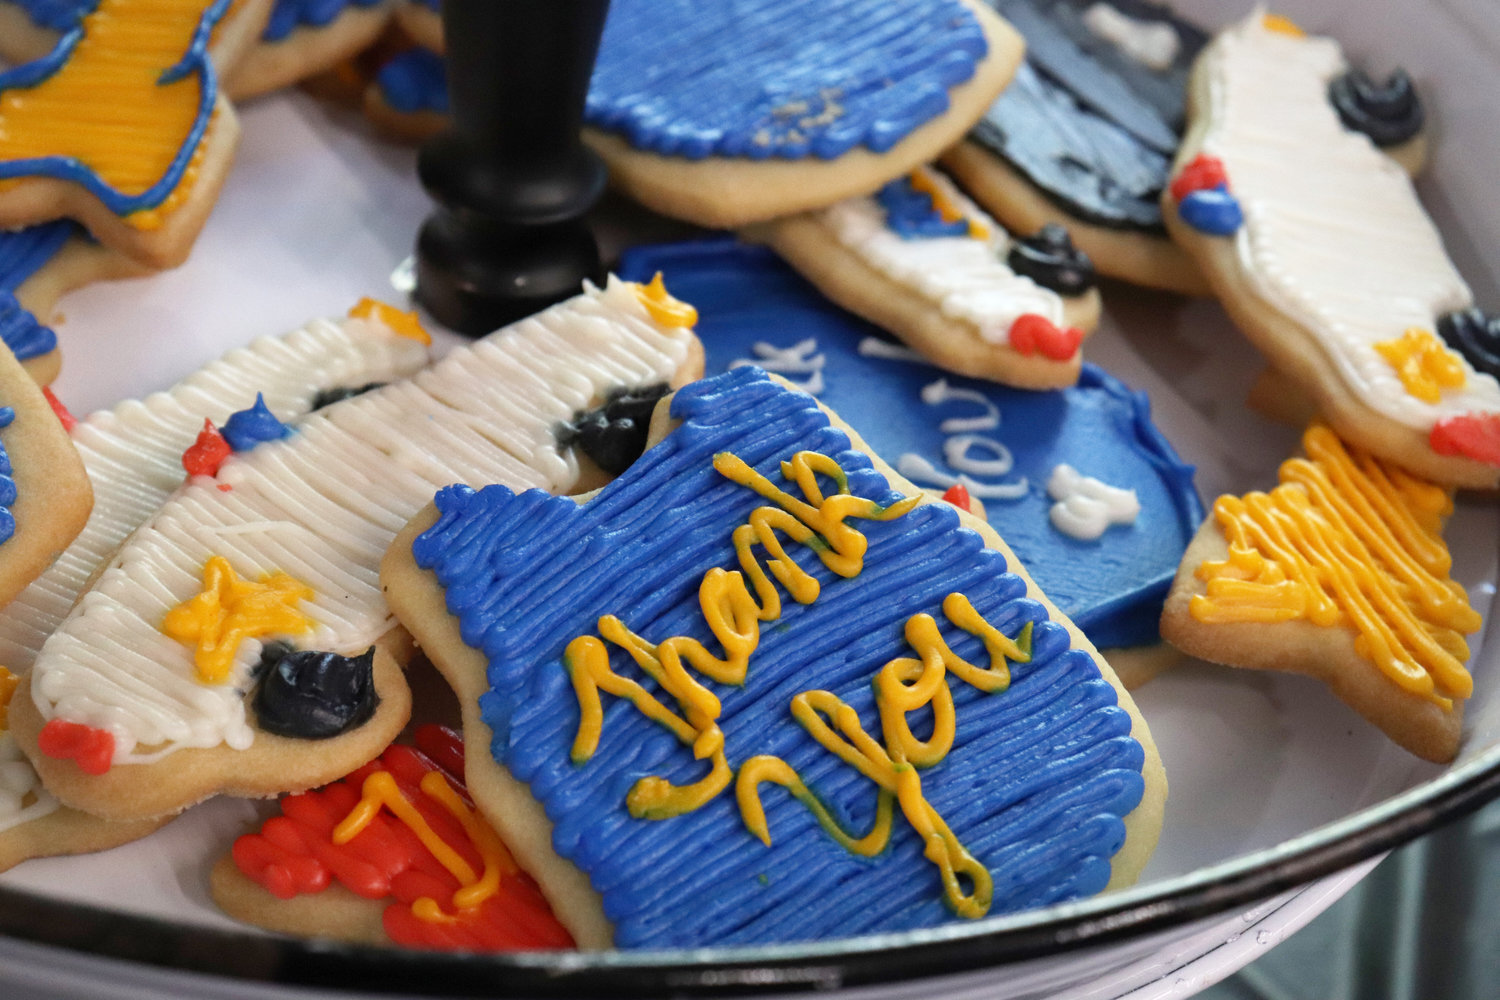 Cookies shaped like police cars and badges reading “Thank You” were among the treats provided by Betty’s Place for Randy Pennington’s retirement party at Toledo High School on Thursday.